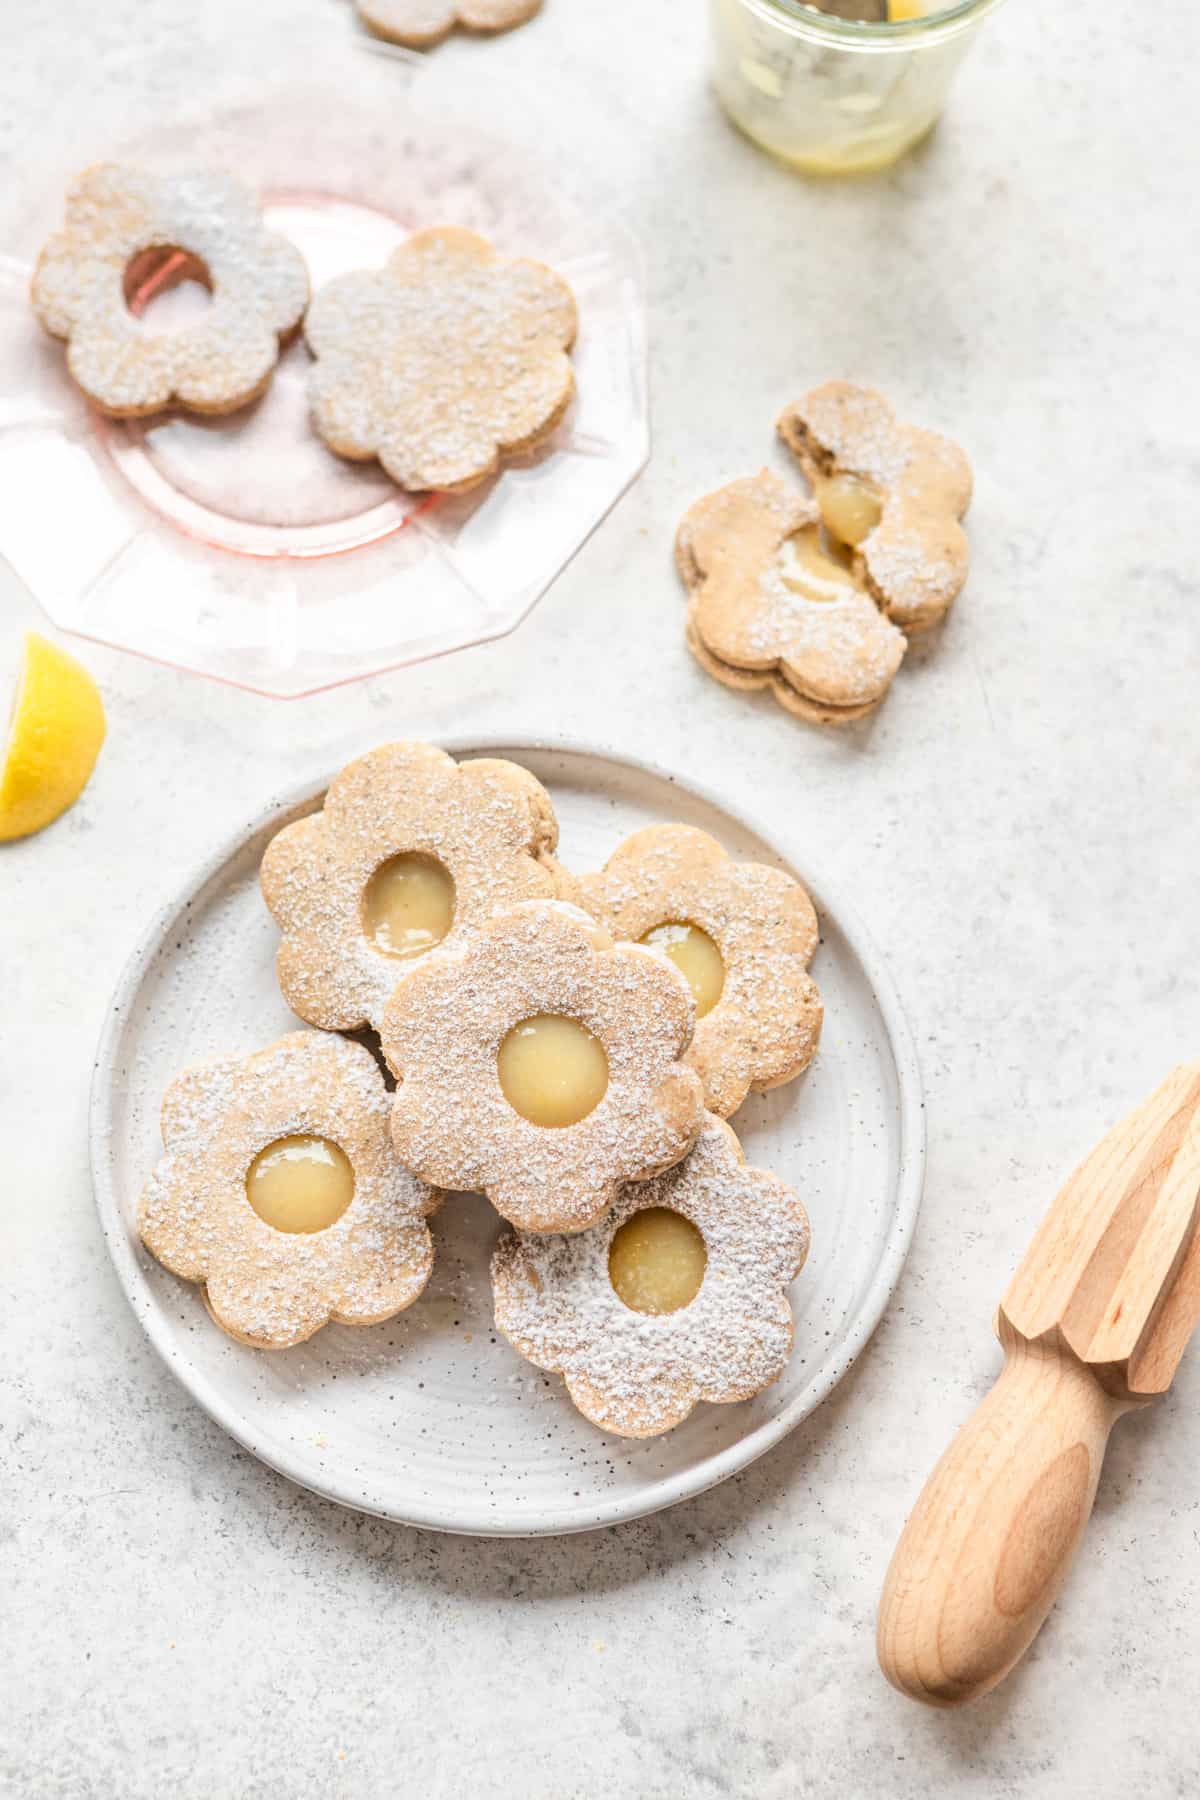 Flower shaped vegan shortbread cookies filled with lemon curd on white and pink plates.